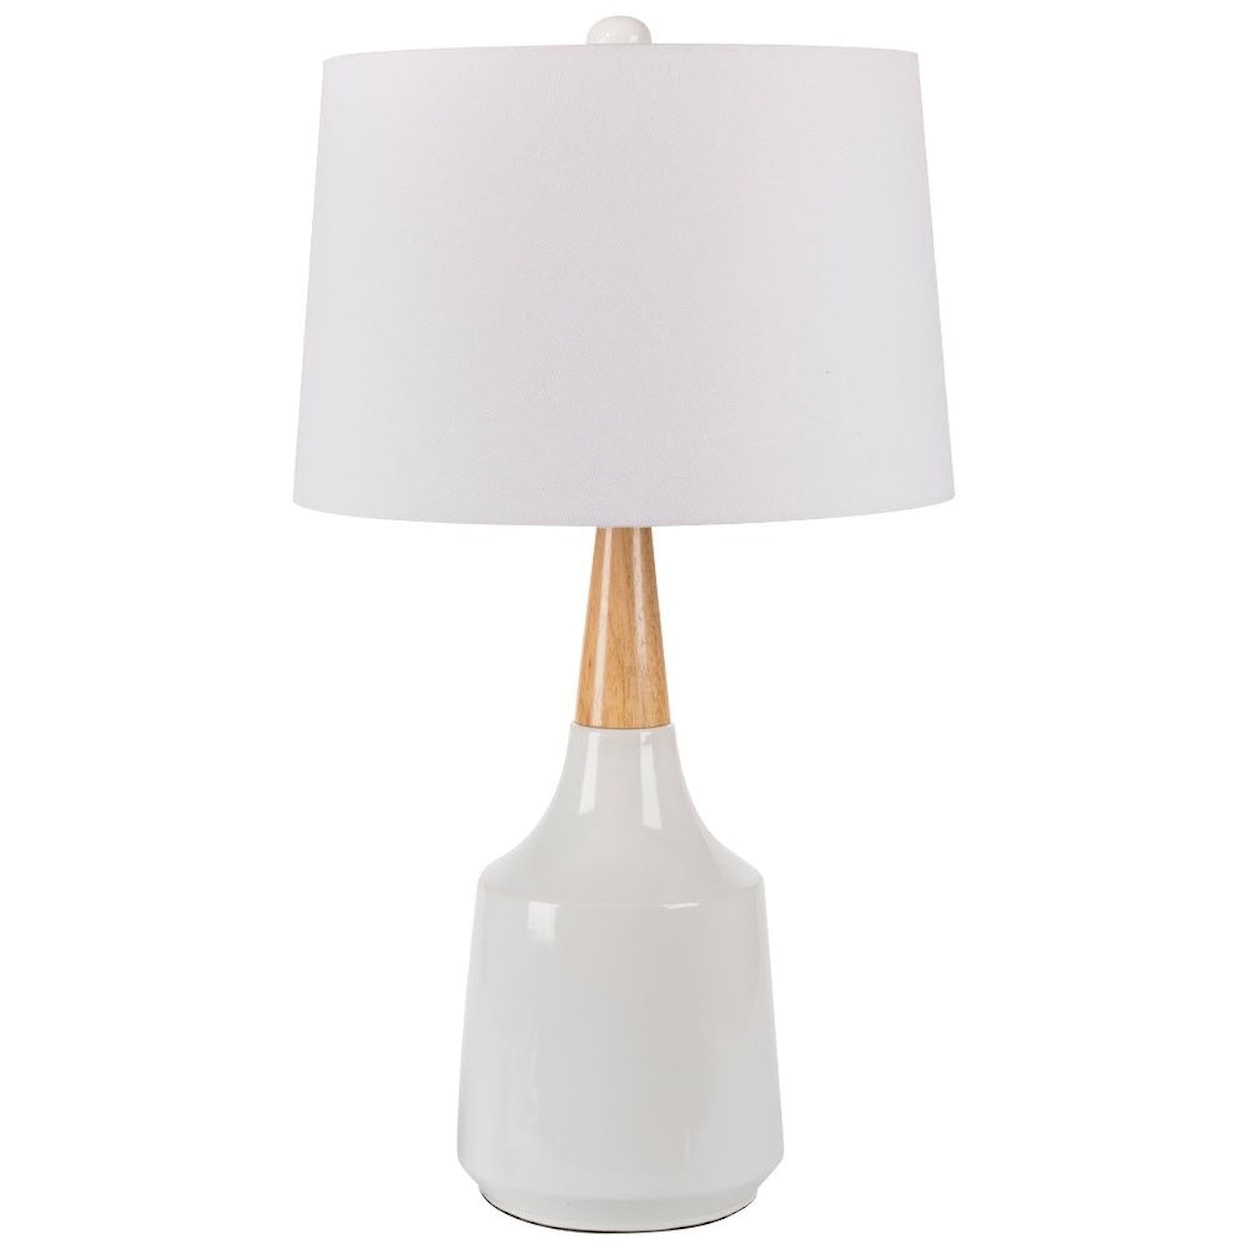 Surya Kent White Contemporary Table Lamp